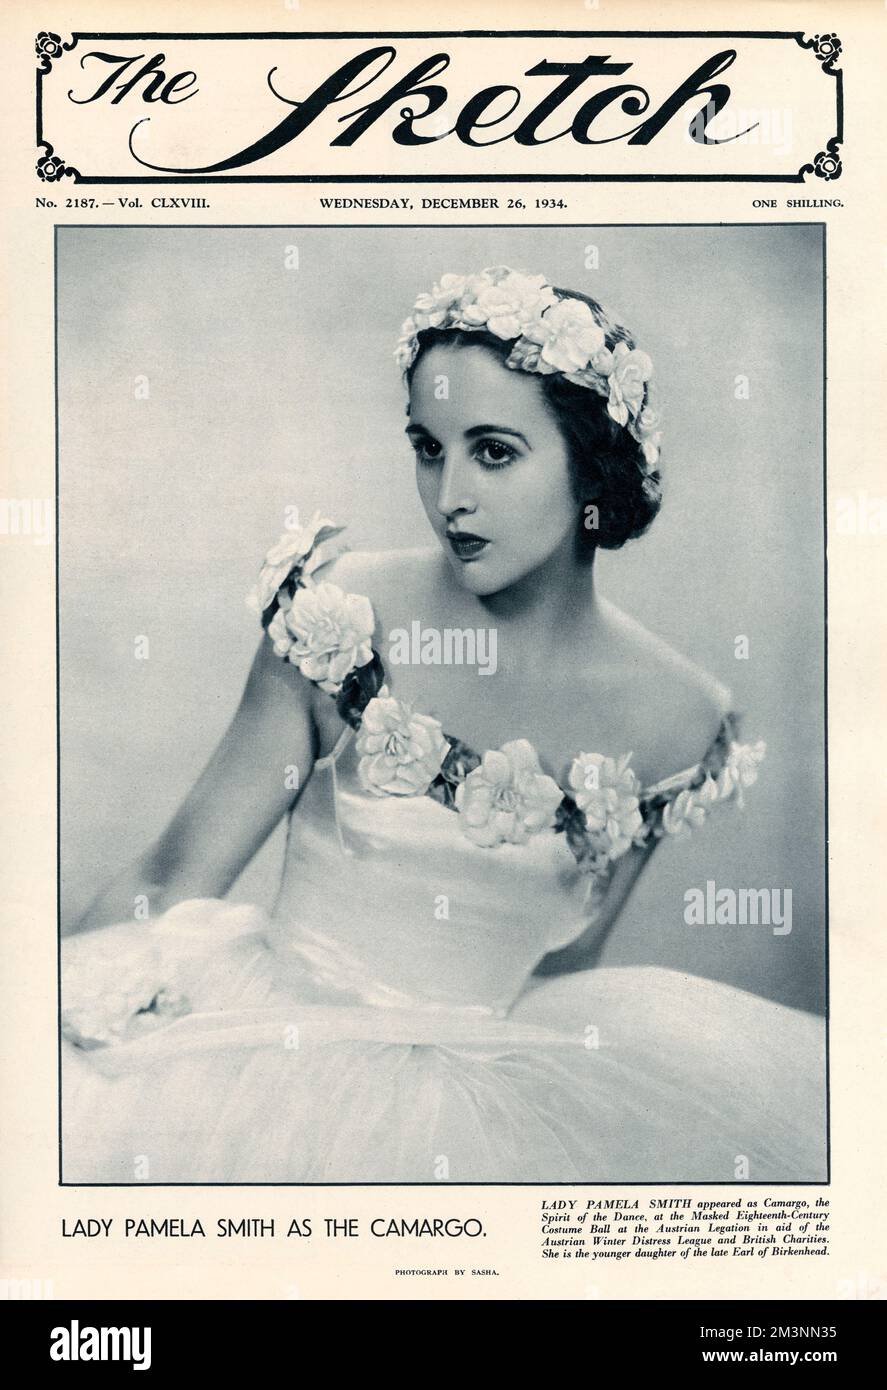 LADY PAMELA SMITH (1915 - 1982), younger daughter of the 1st earl of Birkenhead. In 1936 she married Hon. William Michael Berry, Baron Hartwell, and was later styled Baroness Hartwell. Dressed here as Camargo, the Spirit of the Dance, as the Masked Eighteenth Century Costume Ball at the Austrian Legation in aid of the Austrian Winter Distress League and British Charities.     Date: 1934 Stock Photo